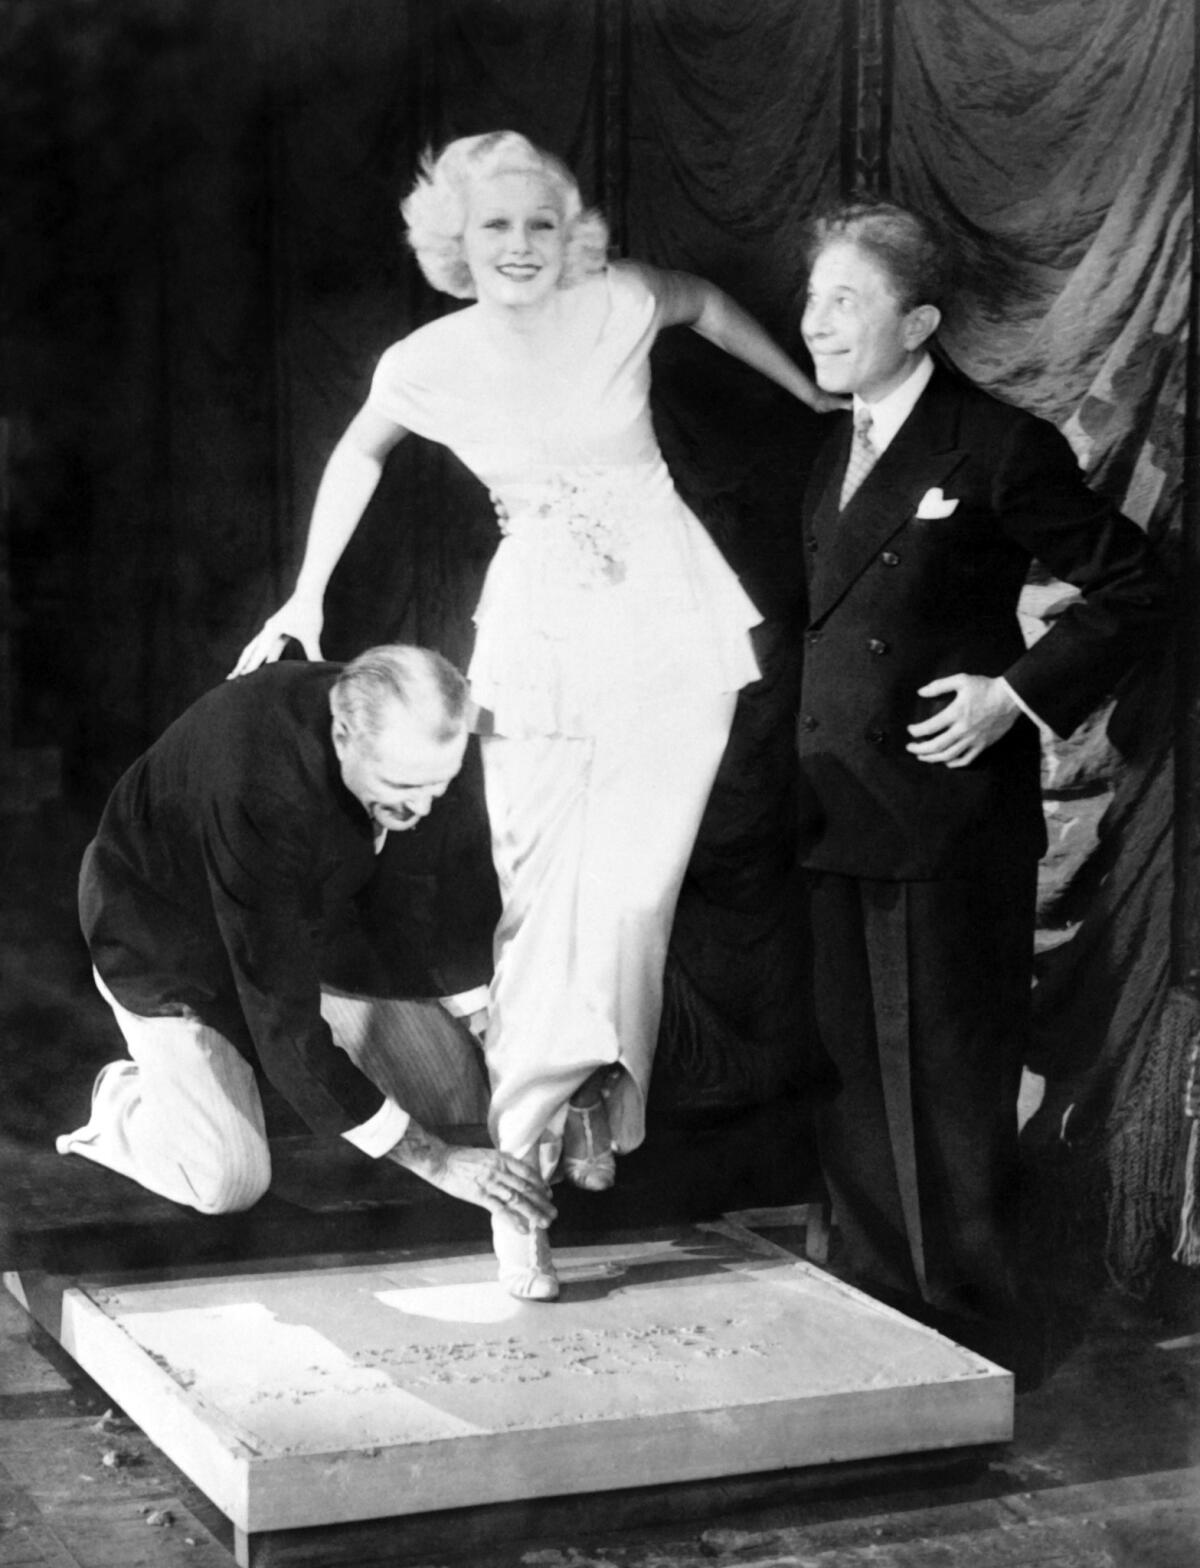 Sid Grauman, at right, takes Jean Harlow's footprint, at the Grauman's Chinese Theatre in Los Angeles, California, in 1933 (Gamma-Keystone via Getty Images)